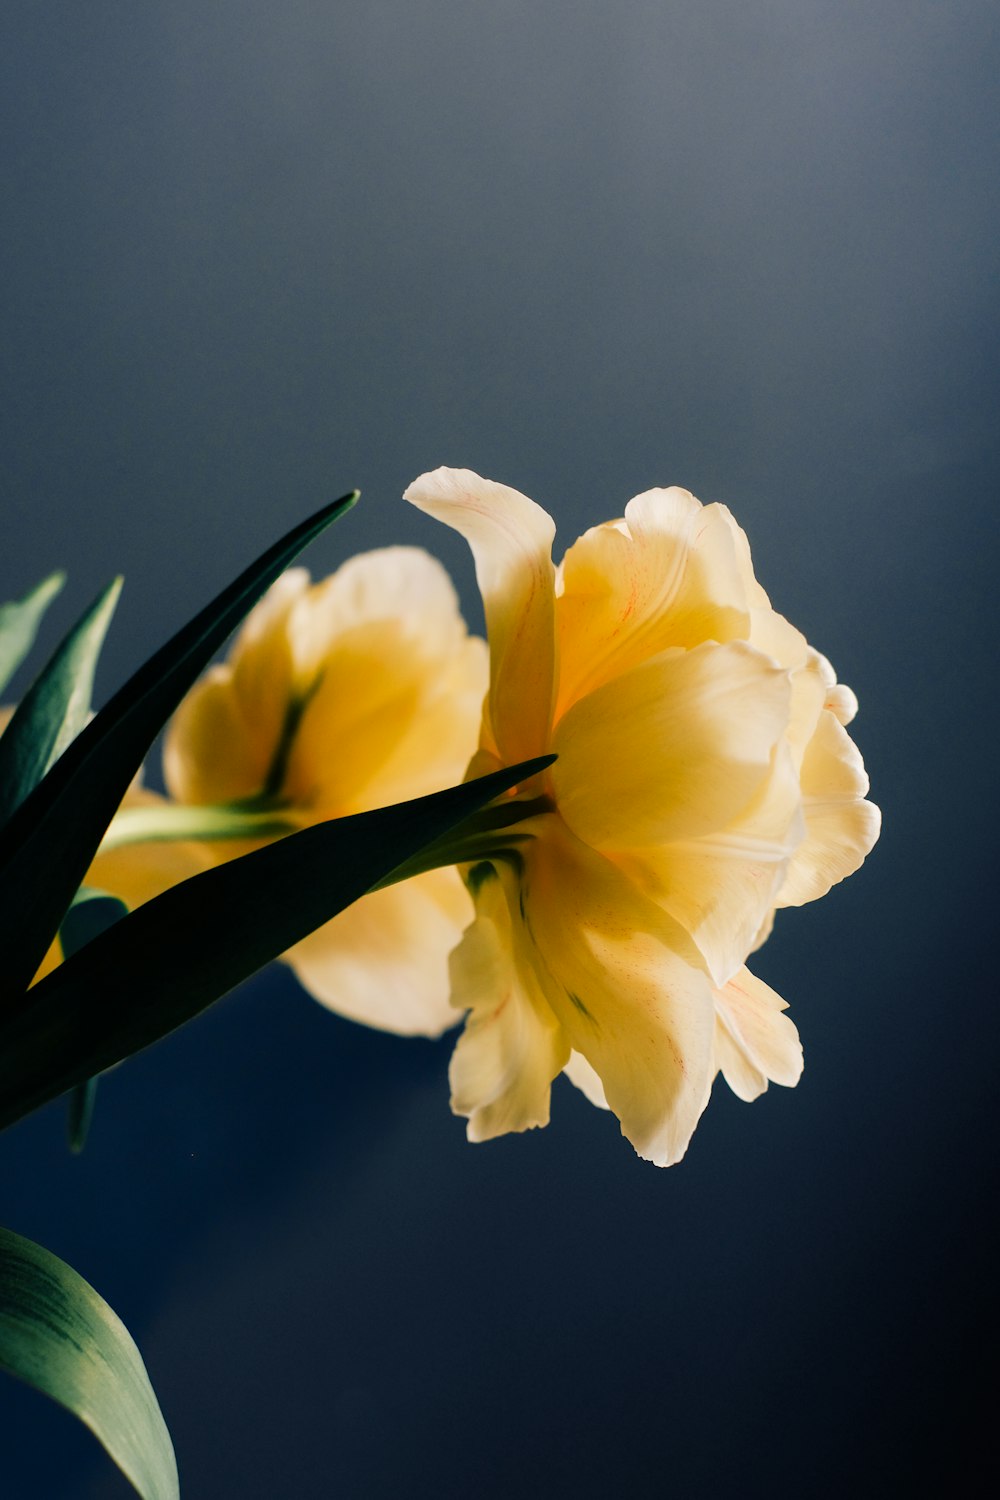 a close up of a yellow flower on a dark background